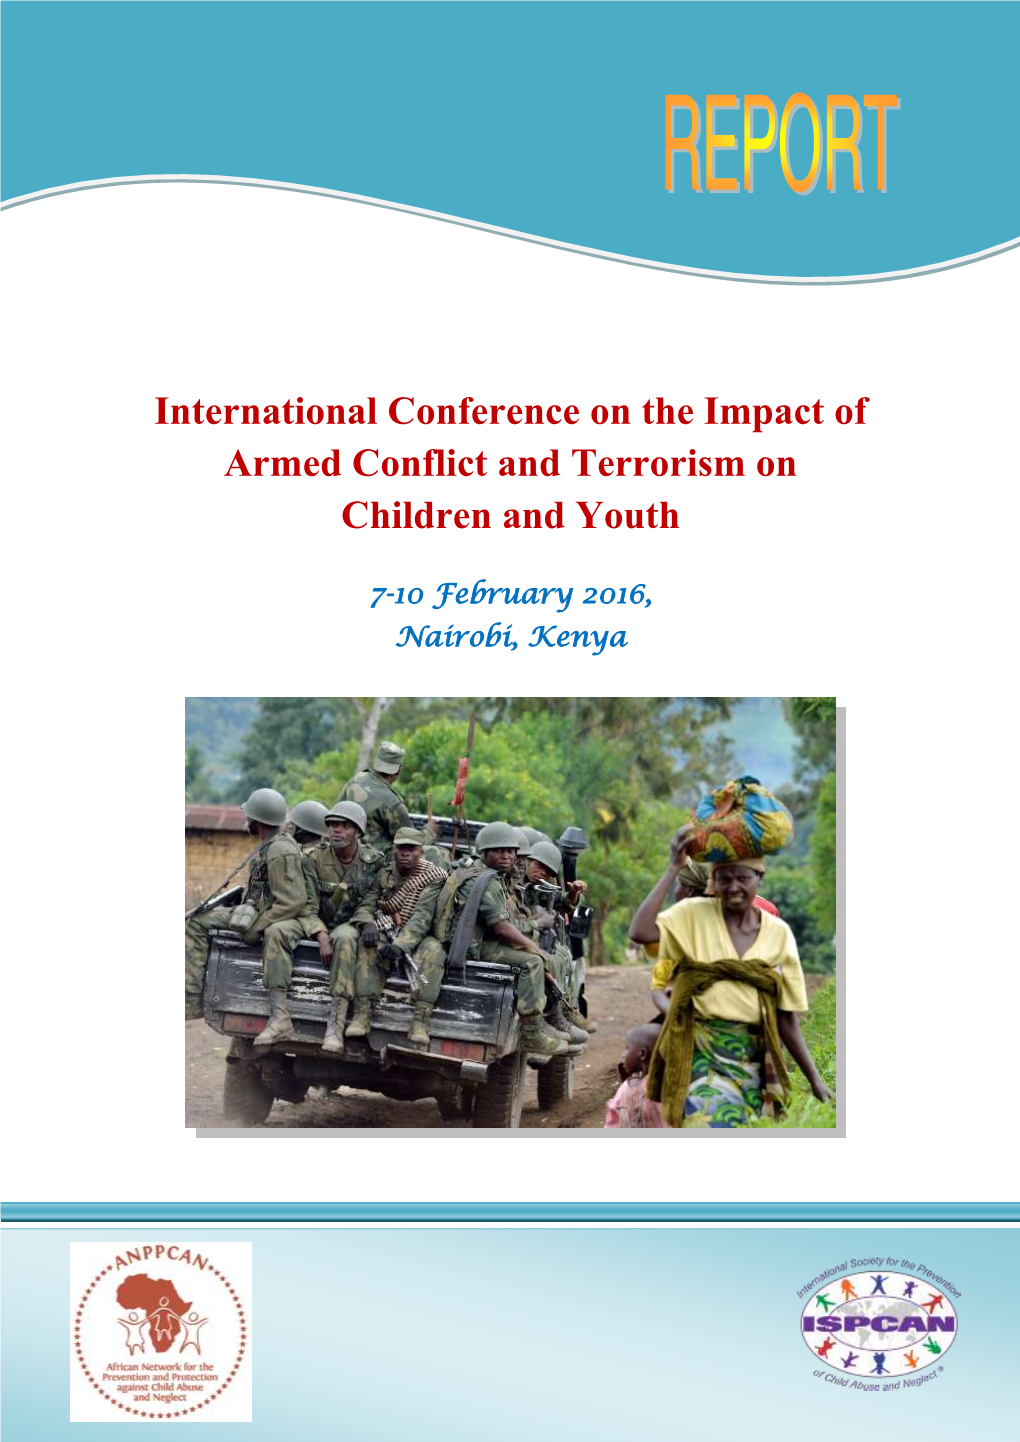 International Conference on the Impact of Armed Conflict and Terrorism on Children and Youth